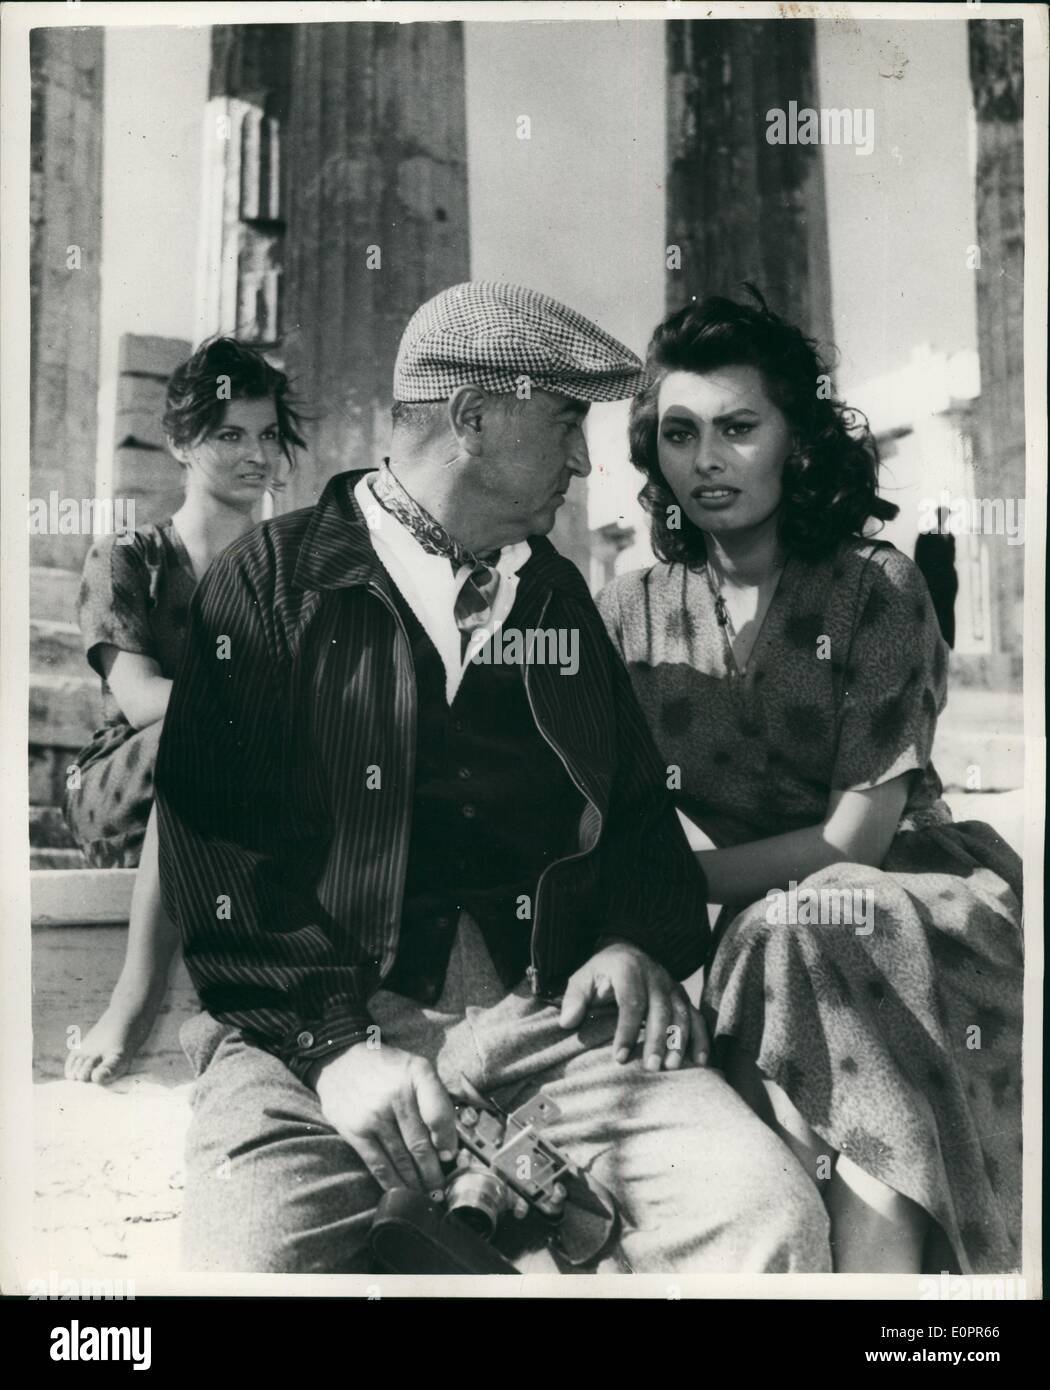 Nov. 11, 1956 - Sophia Loren Filming - At The Acropolis. Her Double Looks On: The Athens Acropolis is the setting for the exterior shots of the new film ''A Boy on a Dolphin'' which stars Italian actress Sophia Loren. Photo shows Sophia Loren with director Jean Negulesco during a short rest between filming (Sophia's Double can be seated behind) Stock Photo